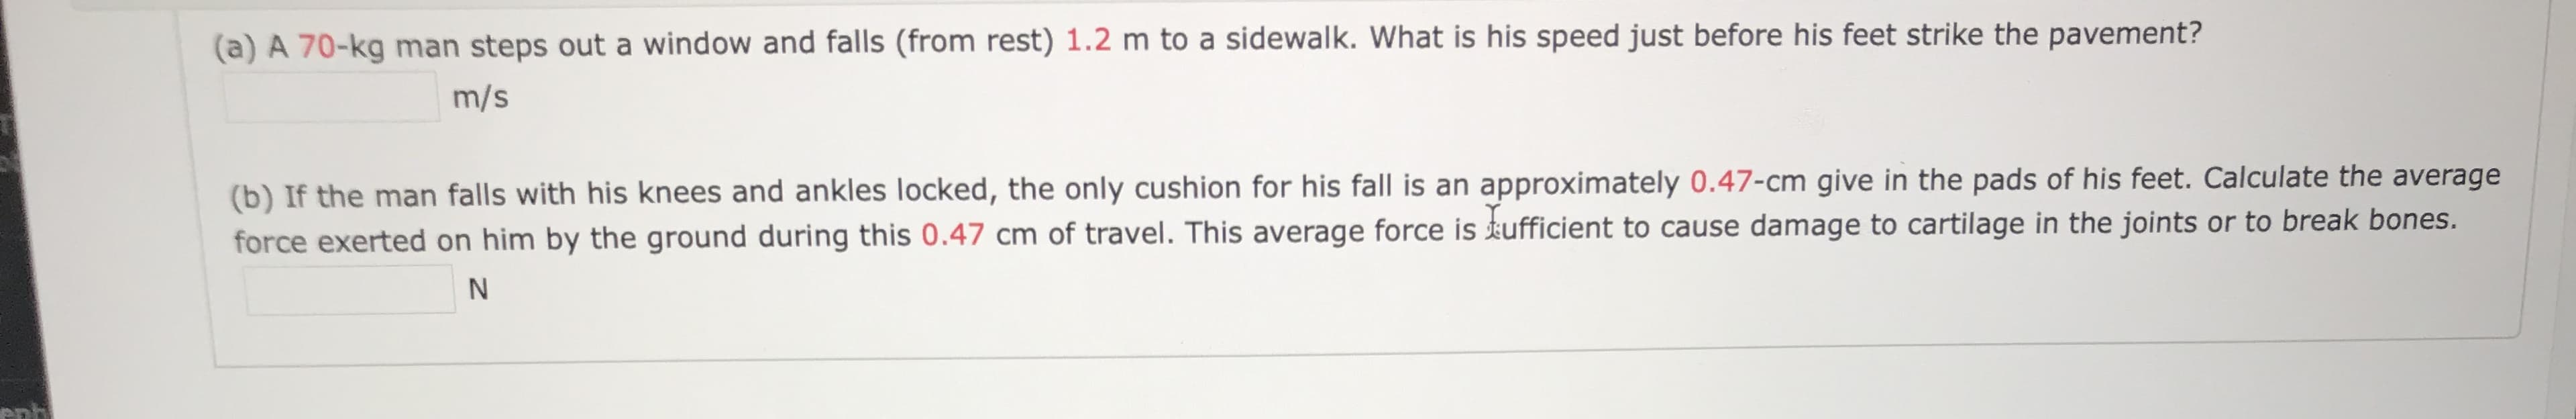 (a) A 70-kg man steps out a window and falls (from rest) 1.2 m to a sidewalk. What is his speed just before his feet strike the pavement?
m/s
(b) If the man falls with his knees and ankles locked, the only cushion for his fall is an approximately 0.47-cm give in the pads of his feet. Calculate the average
force exerted on him by the ground during this 0.47 cm of travel. This average force is tufficient to cause damage to cartilage in the joints or to break bones.
